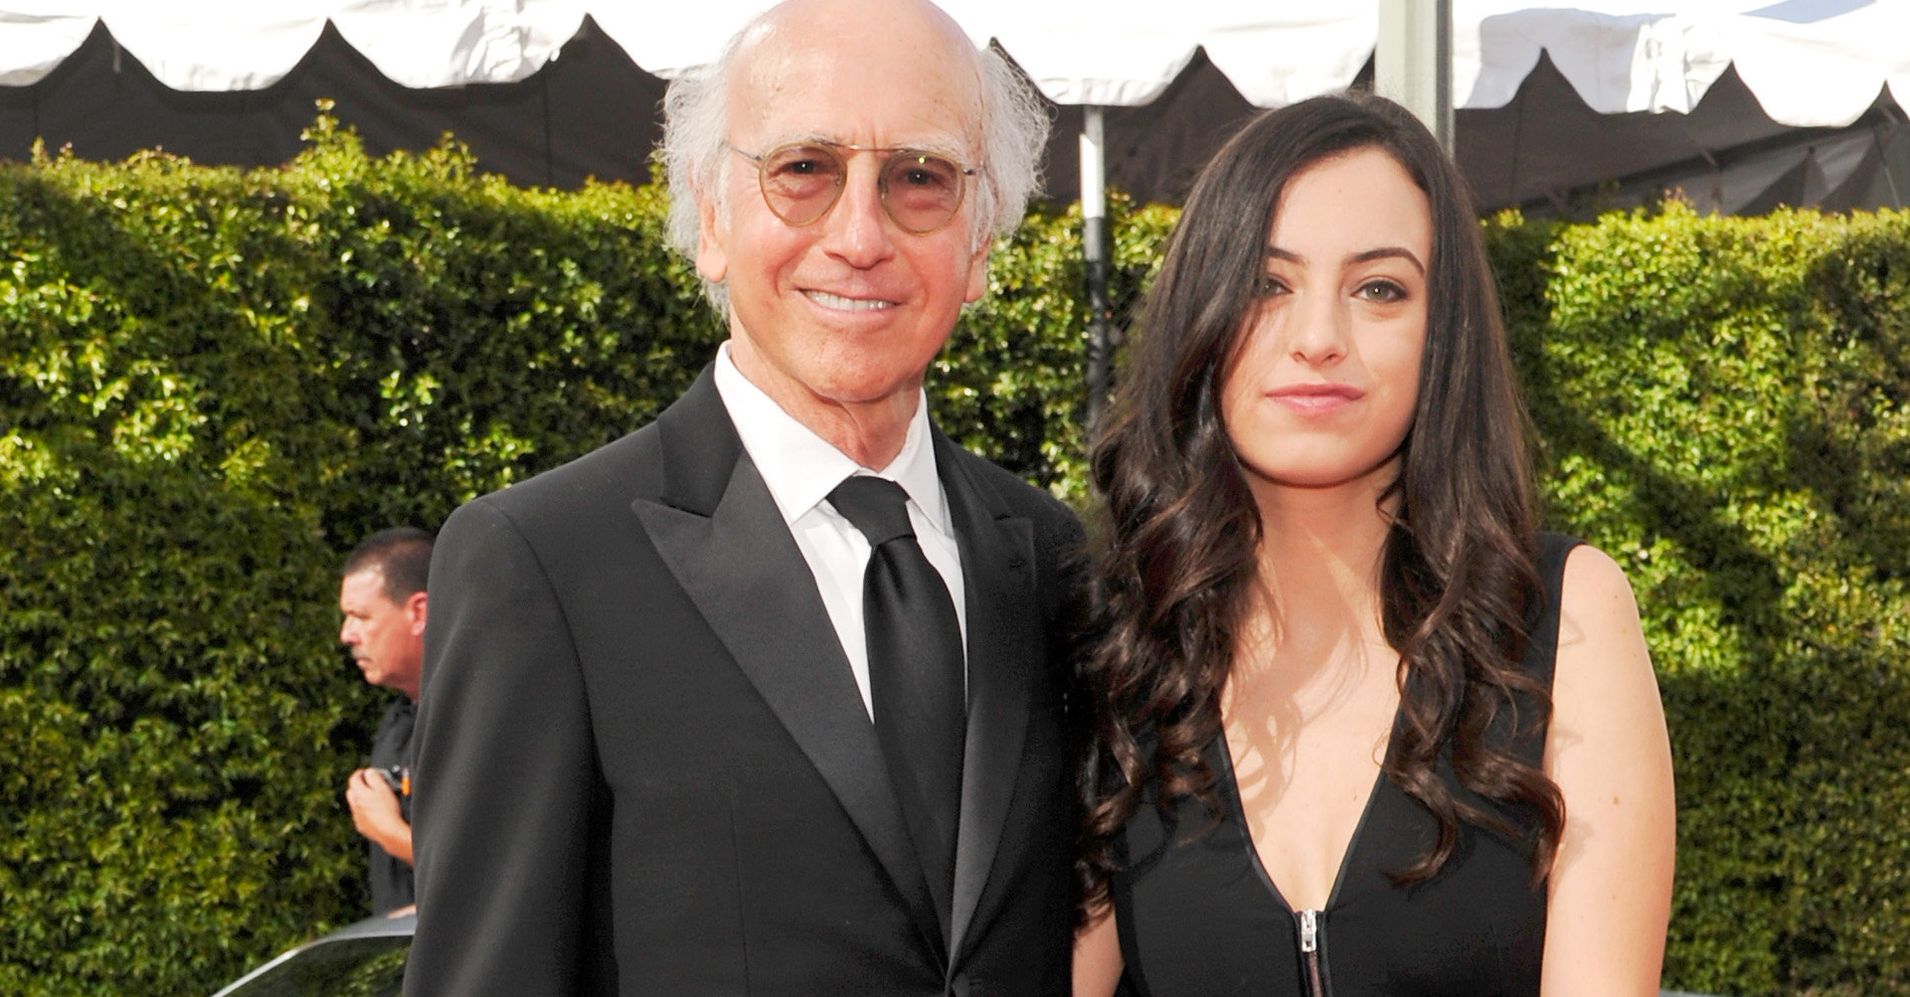 Larry David's Daughter Cazzie's New Web Series Is Like 'Curb' For Millennials | HuffPost1910 x 1000